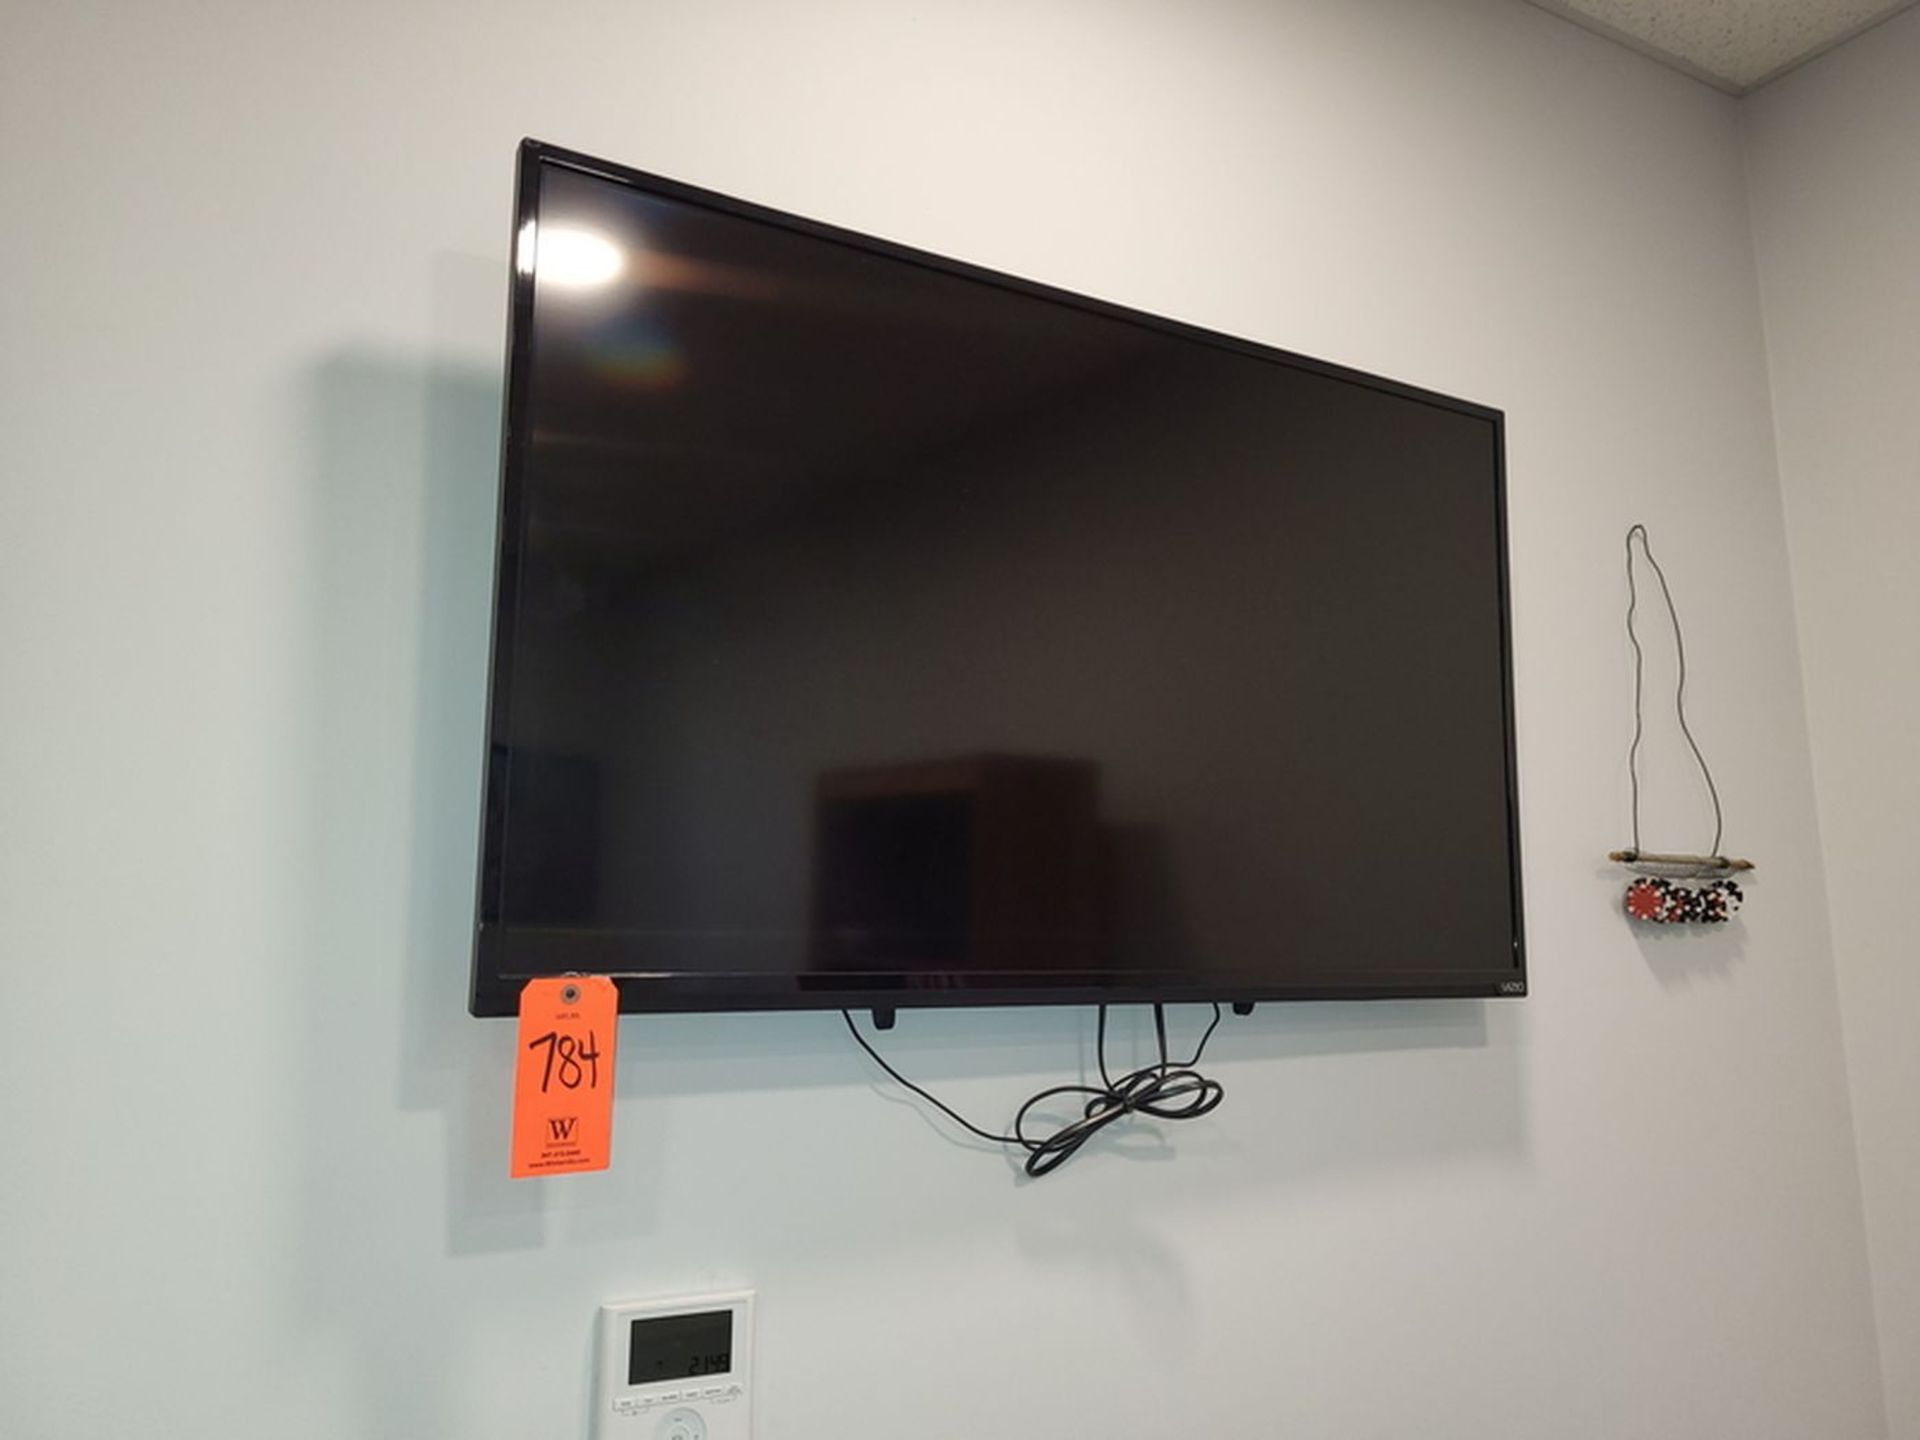 Vizio 45 in. (approx.) Wall-Mounted Flat Screen TV/Monitor; with Remote